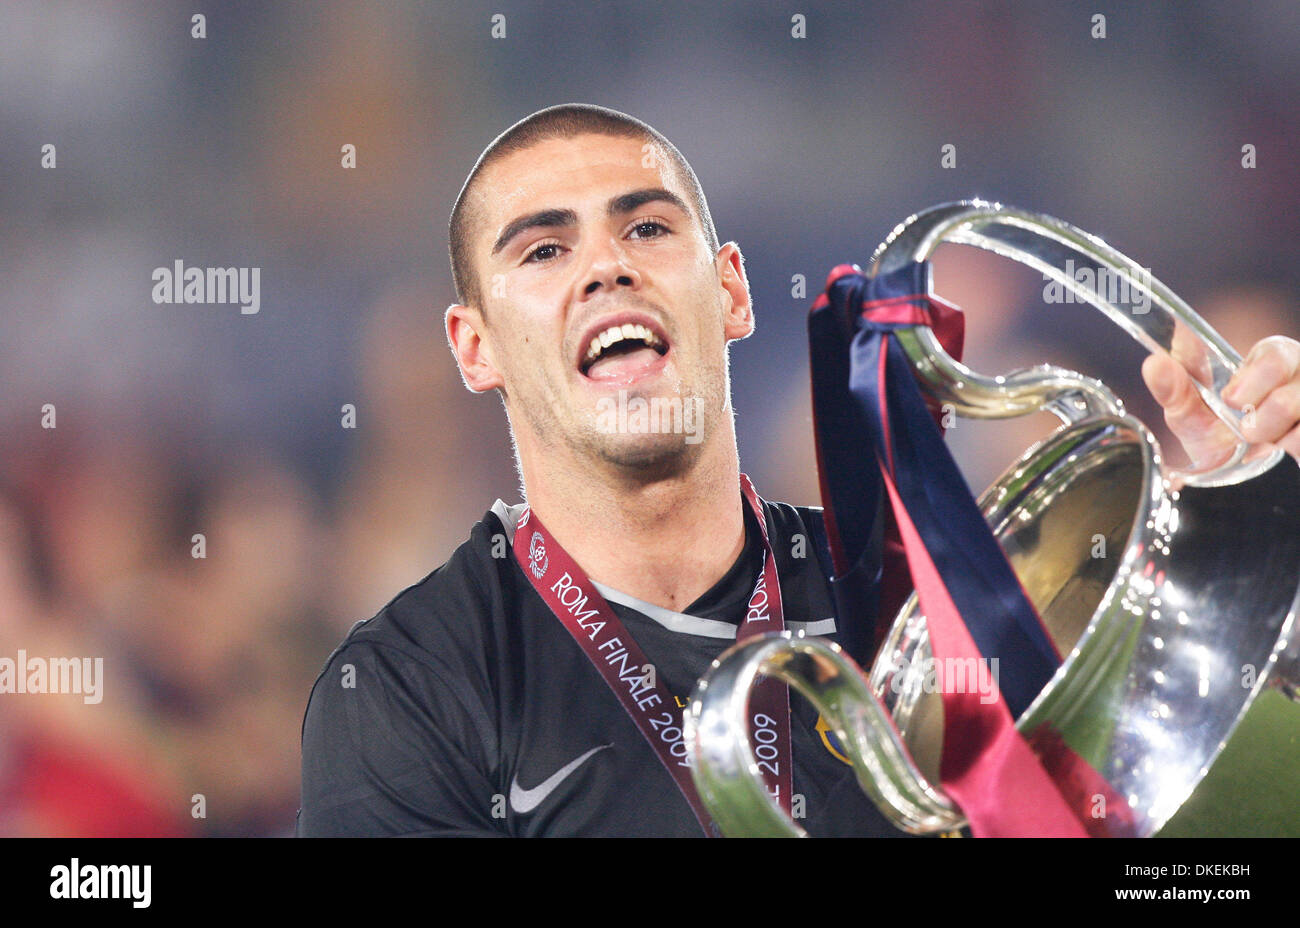 May 27, 2009 - Rome, Italy - VICTOR VALDES of Barcelona FC during UEFA Champions League Soccer final between Barcelona and Manchester United at the Stadio Olimpico in Rome, Italy. Barcelona beat Manchester United 2-0. (Credit Image: © Foto Olimpic/Action Press/ZUMA Press) RESTRICTIONS: * North and South America Rights Only * Stock Photo